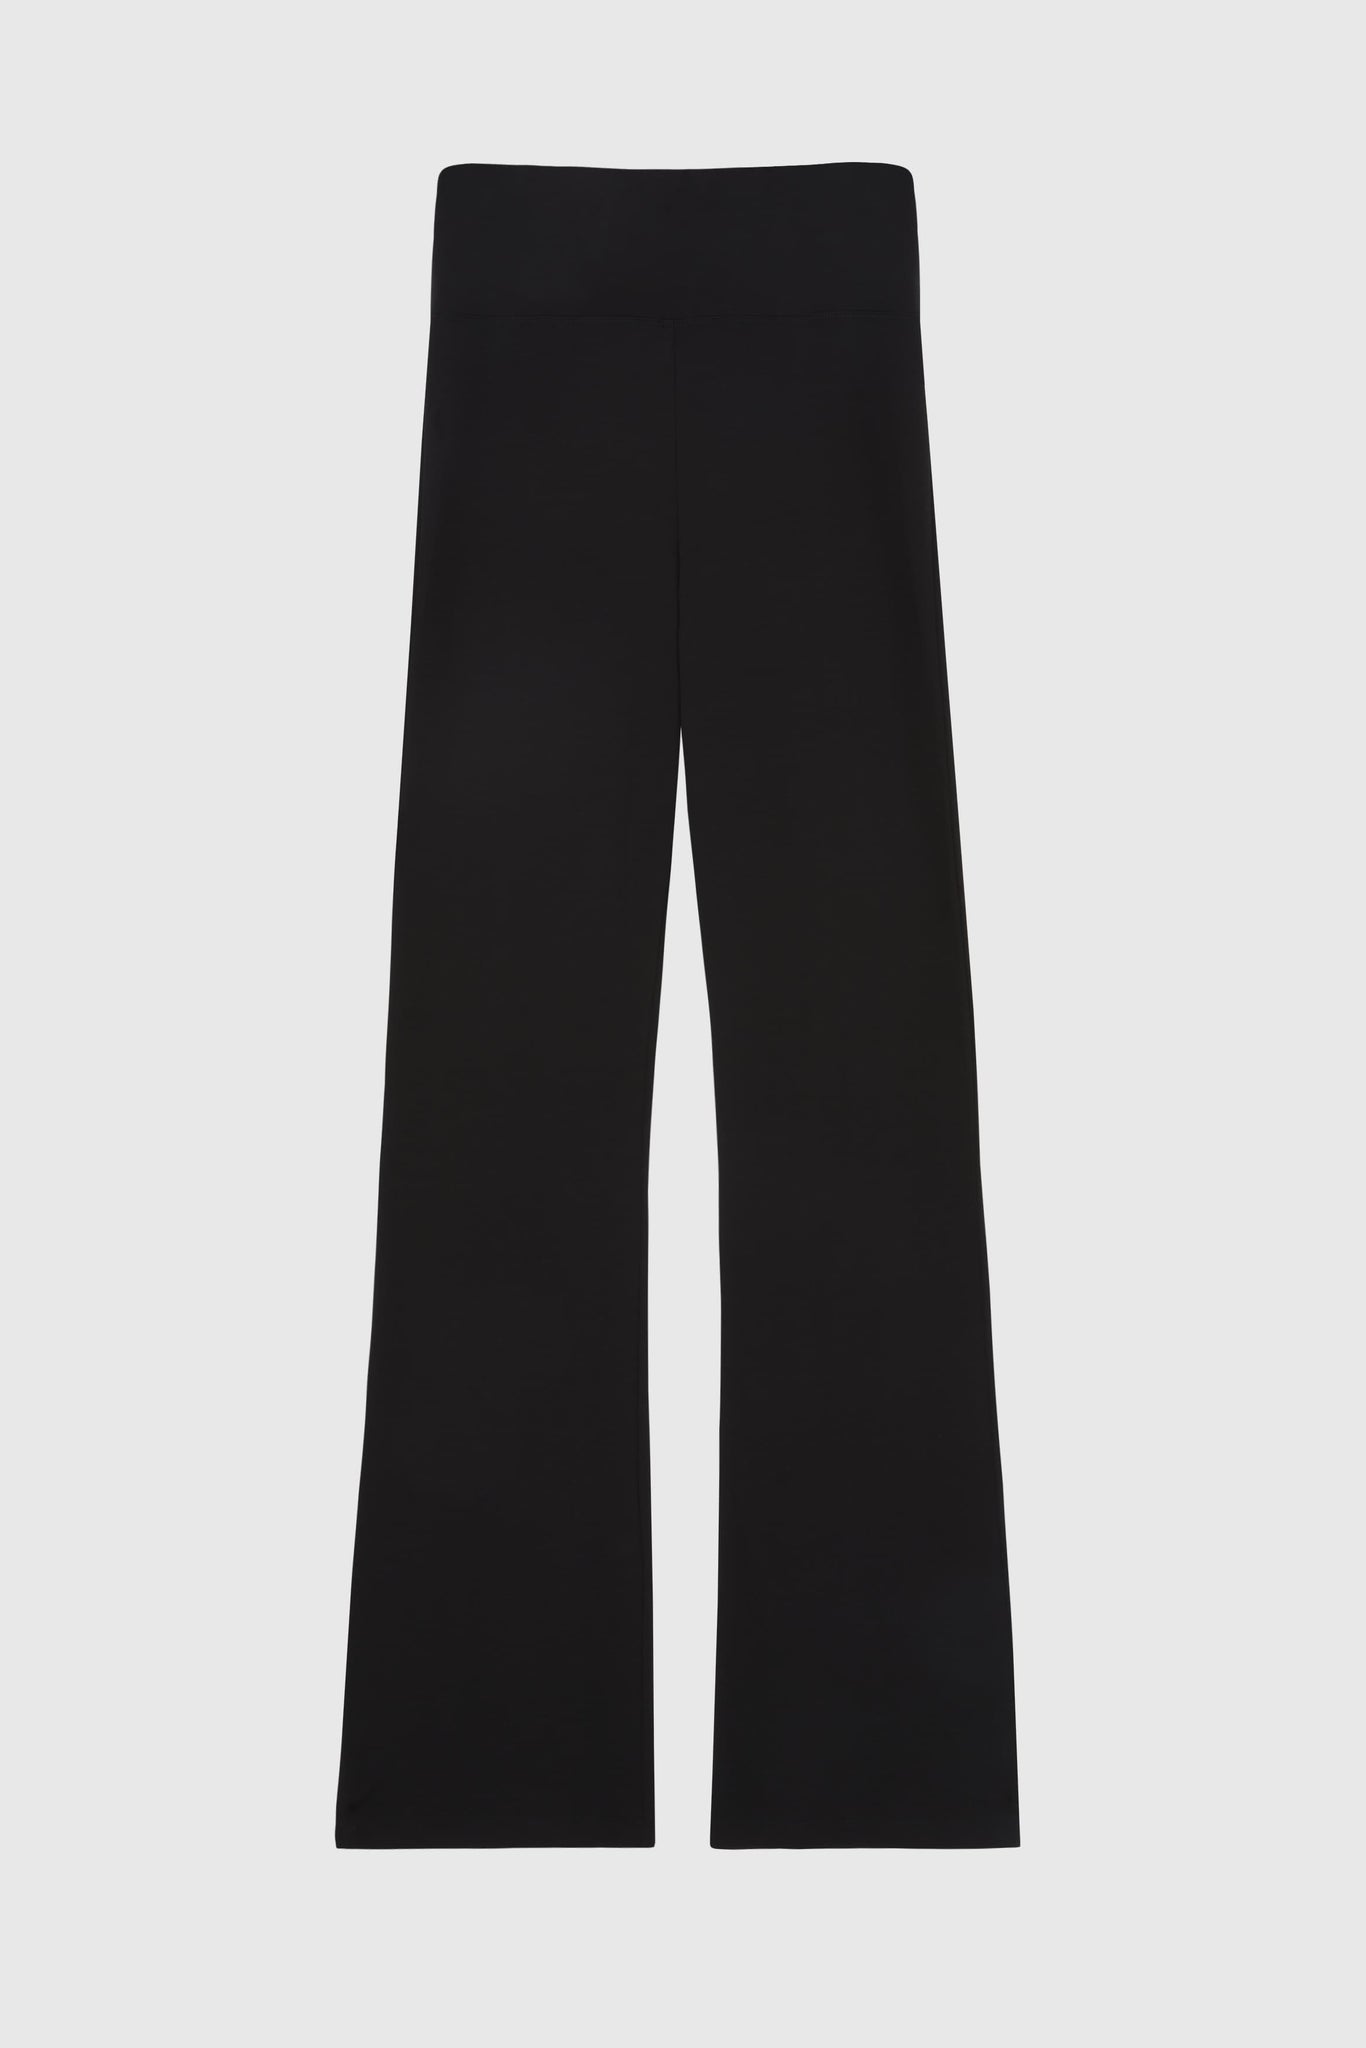 Lavender Hill Micro Modal Women's Black Flared Exercise Trousers